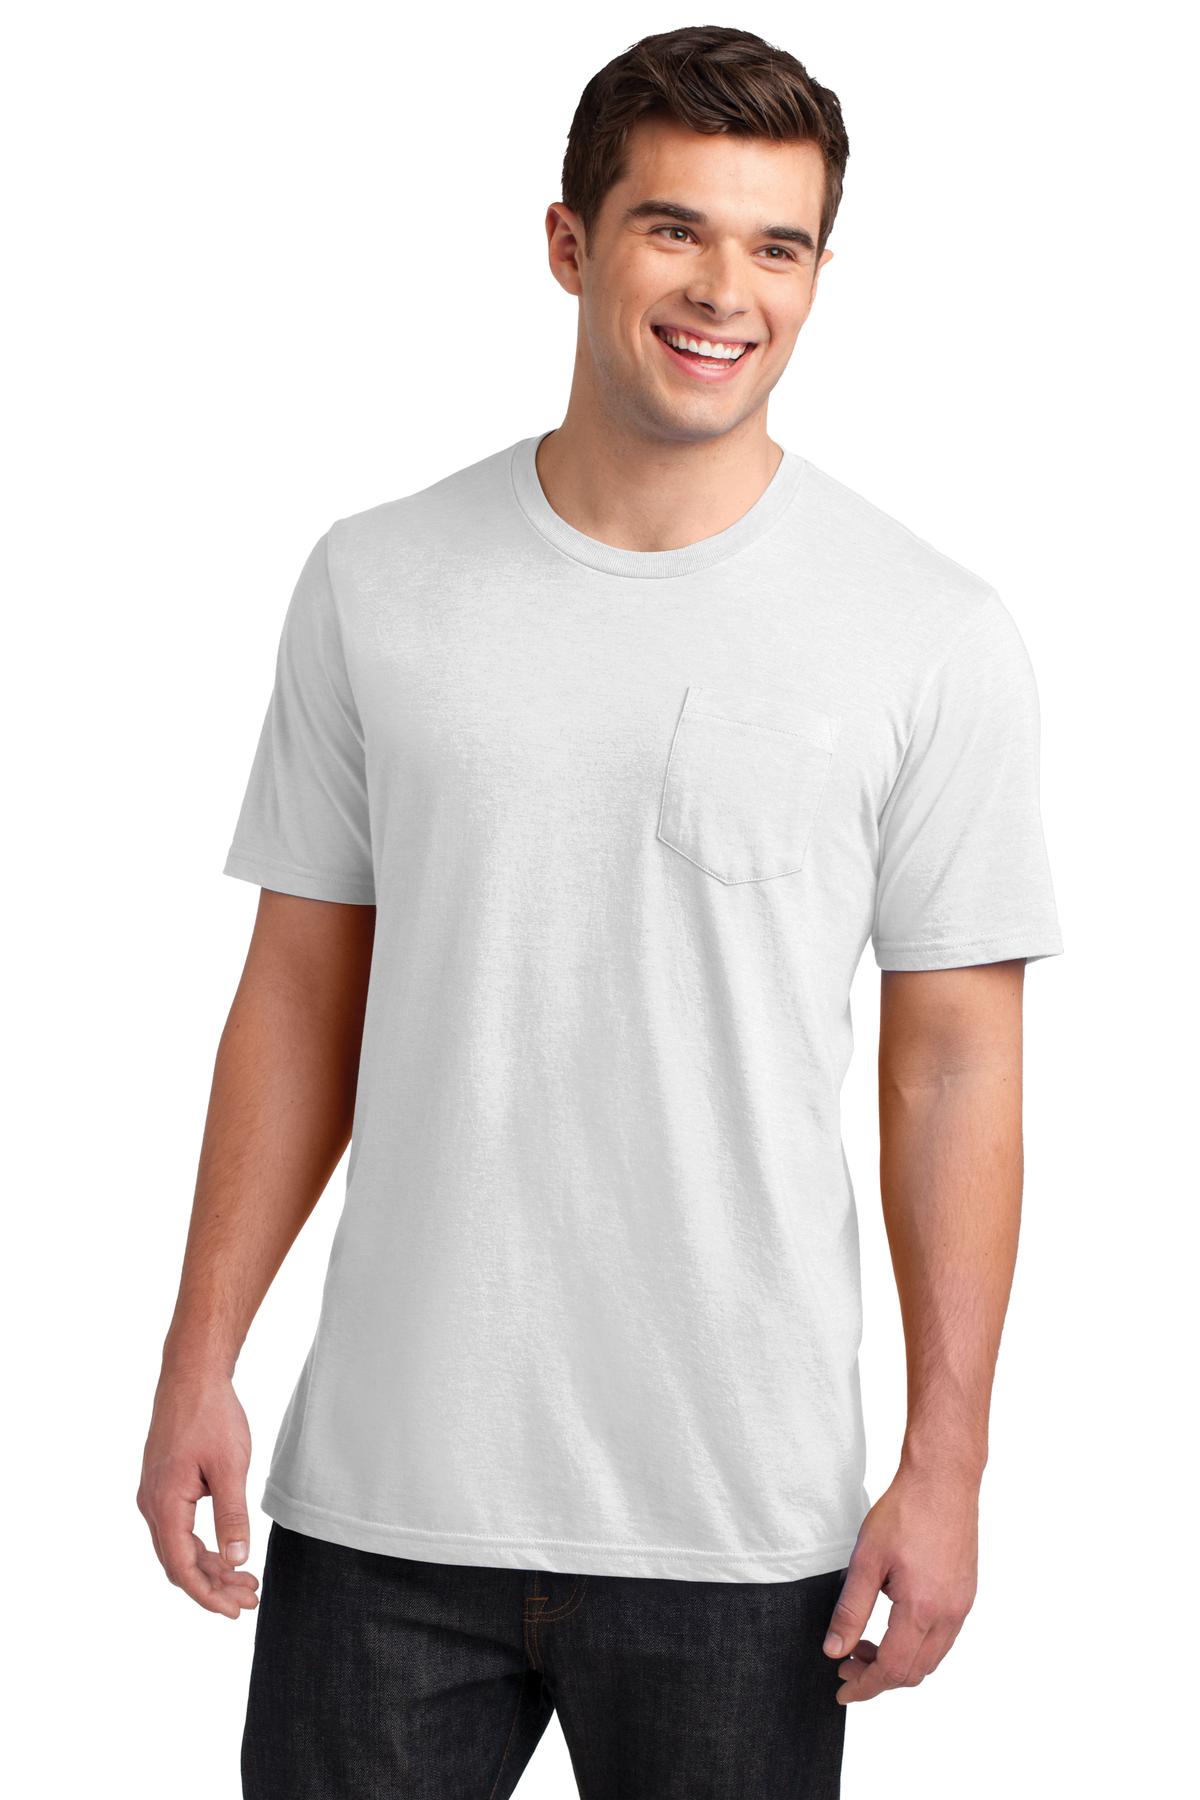 District Hospitality T-Shirts ® Very Important Tee® with Pocket.-District